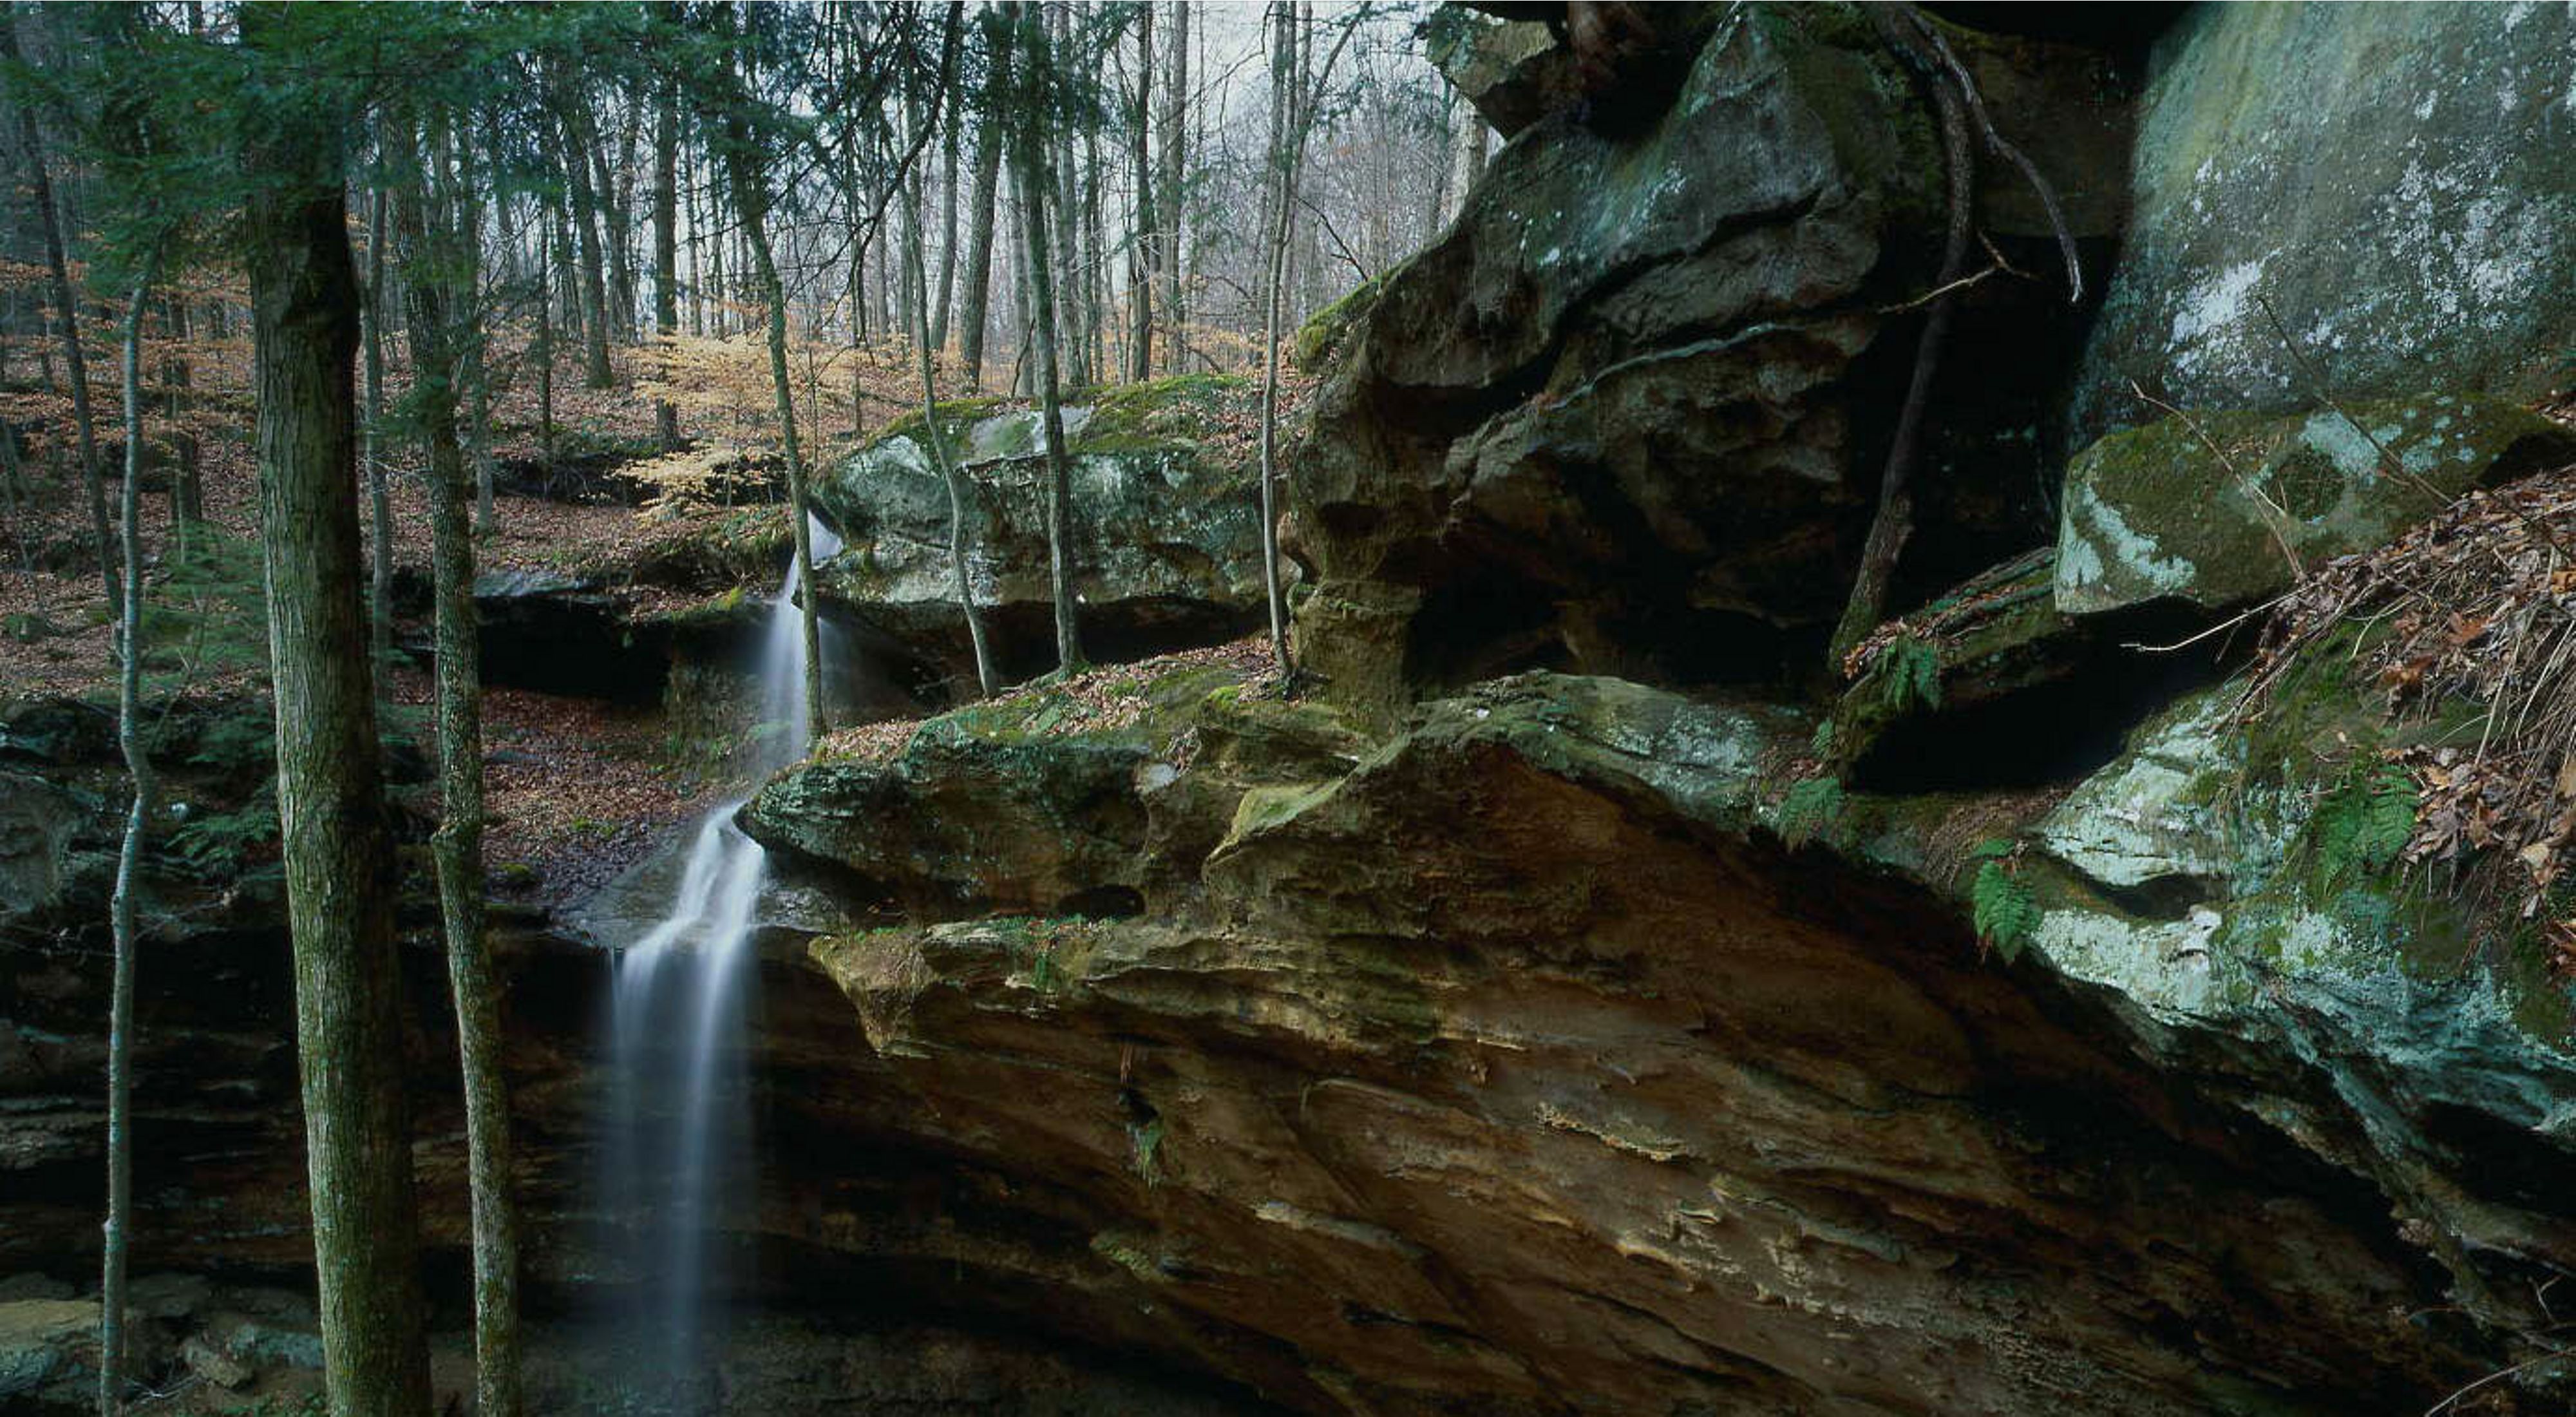 Part of Shooting Star Cliffs in Perry County, Indiana.